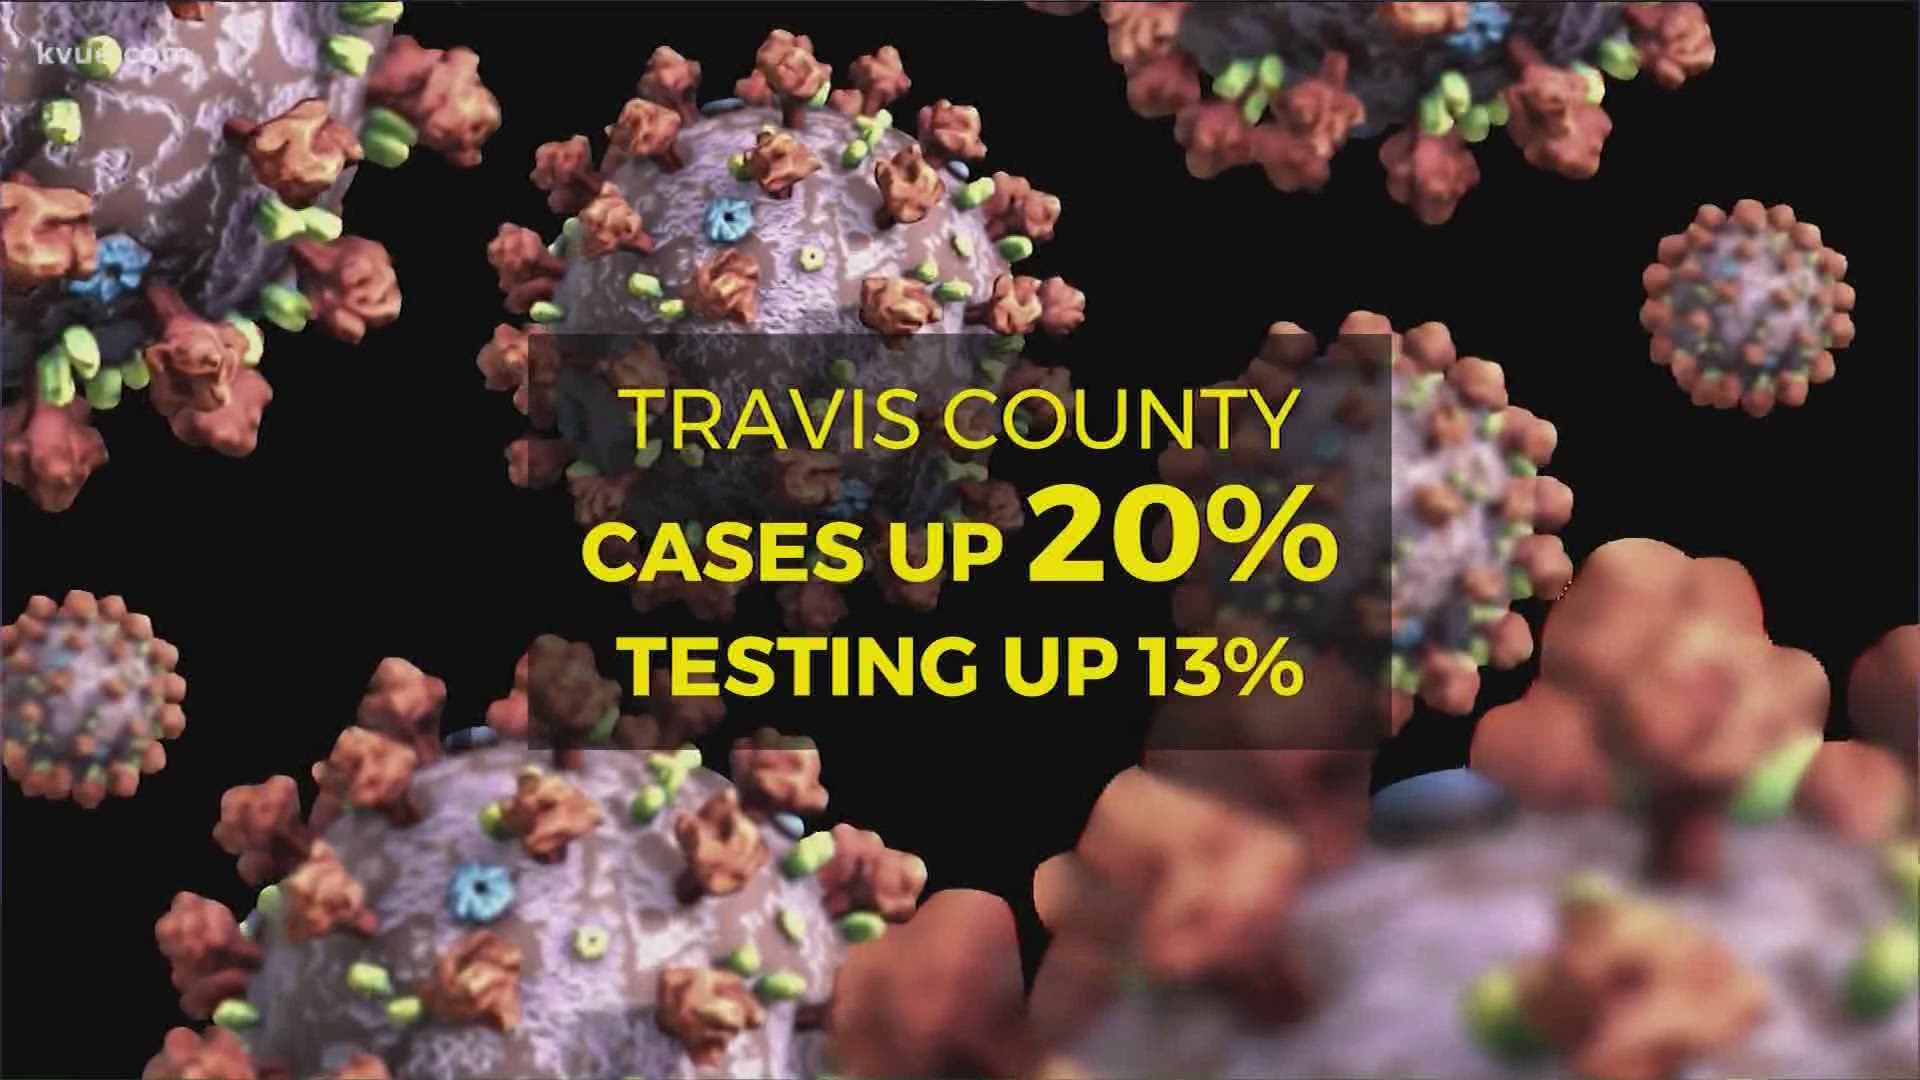 Travis County isn't alone in seeing big spikes in cases. Bob Buckalew breaks down the numbers across Central Texas.